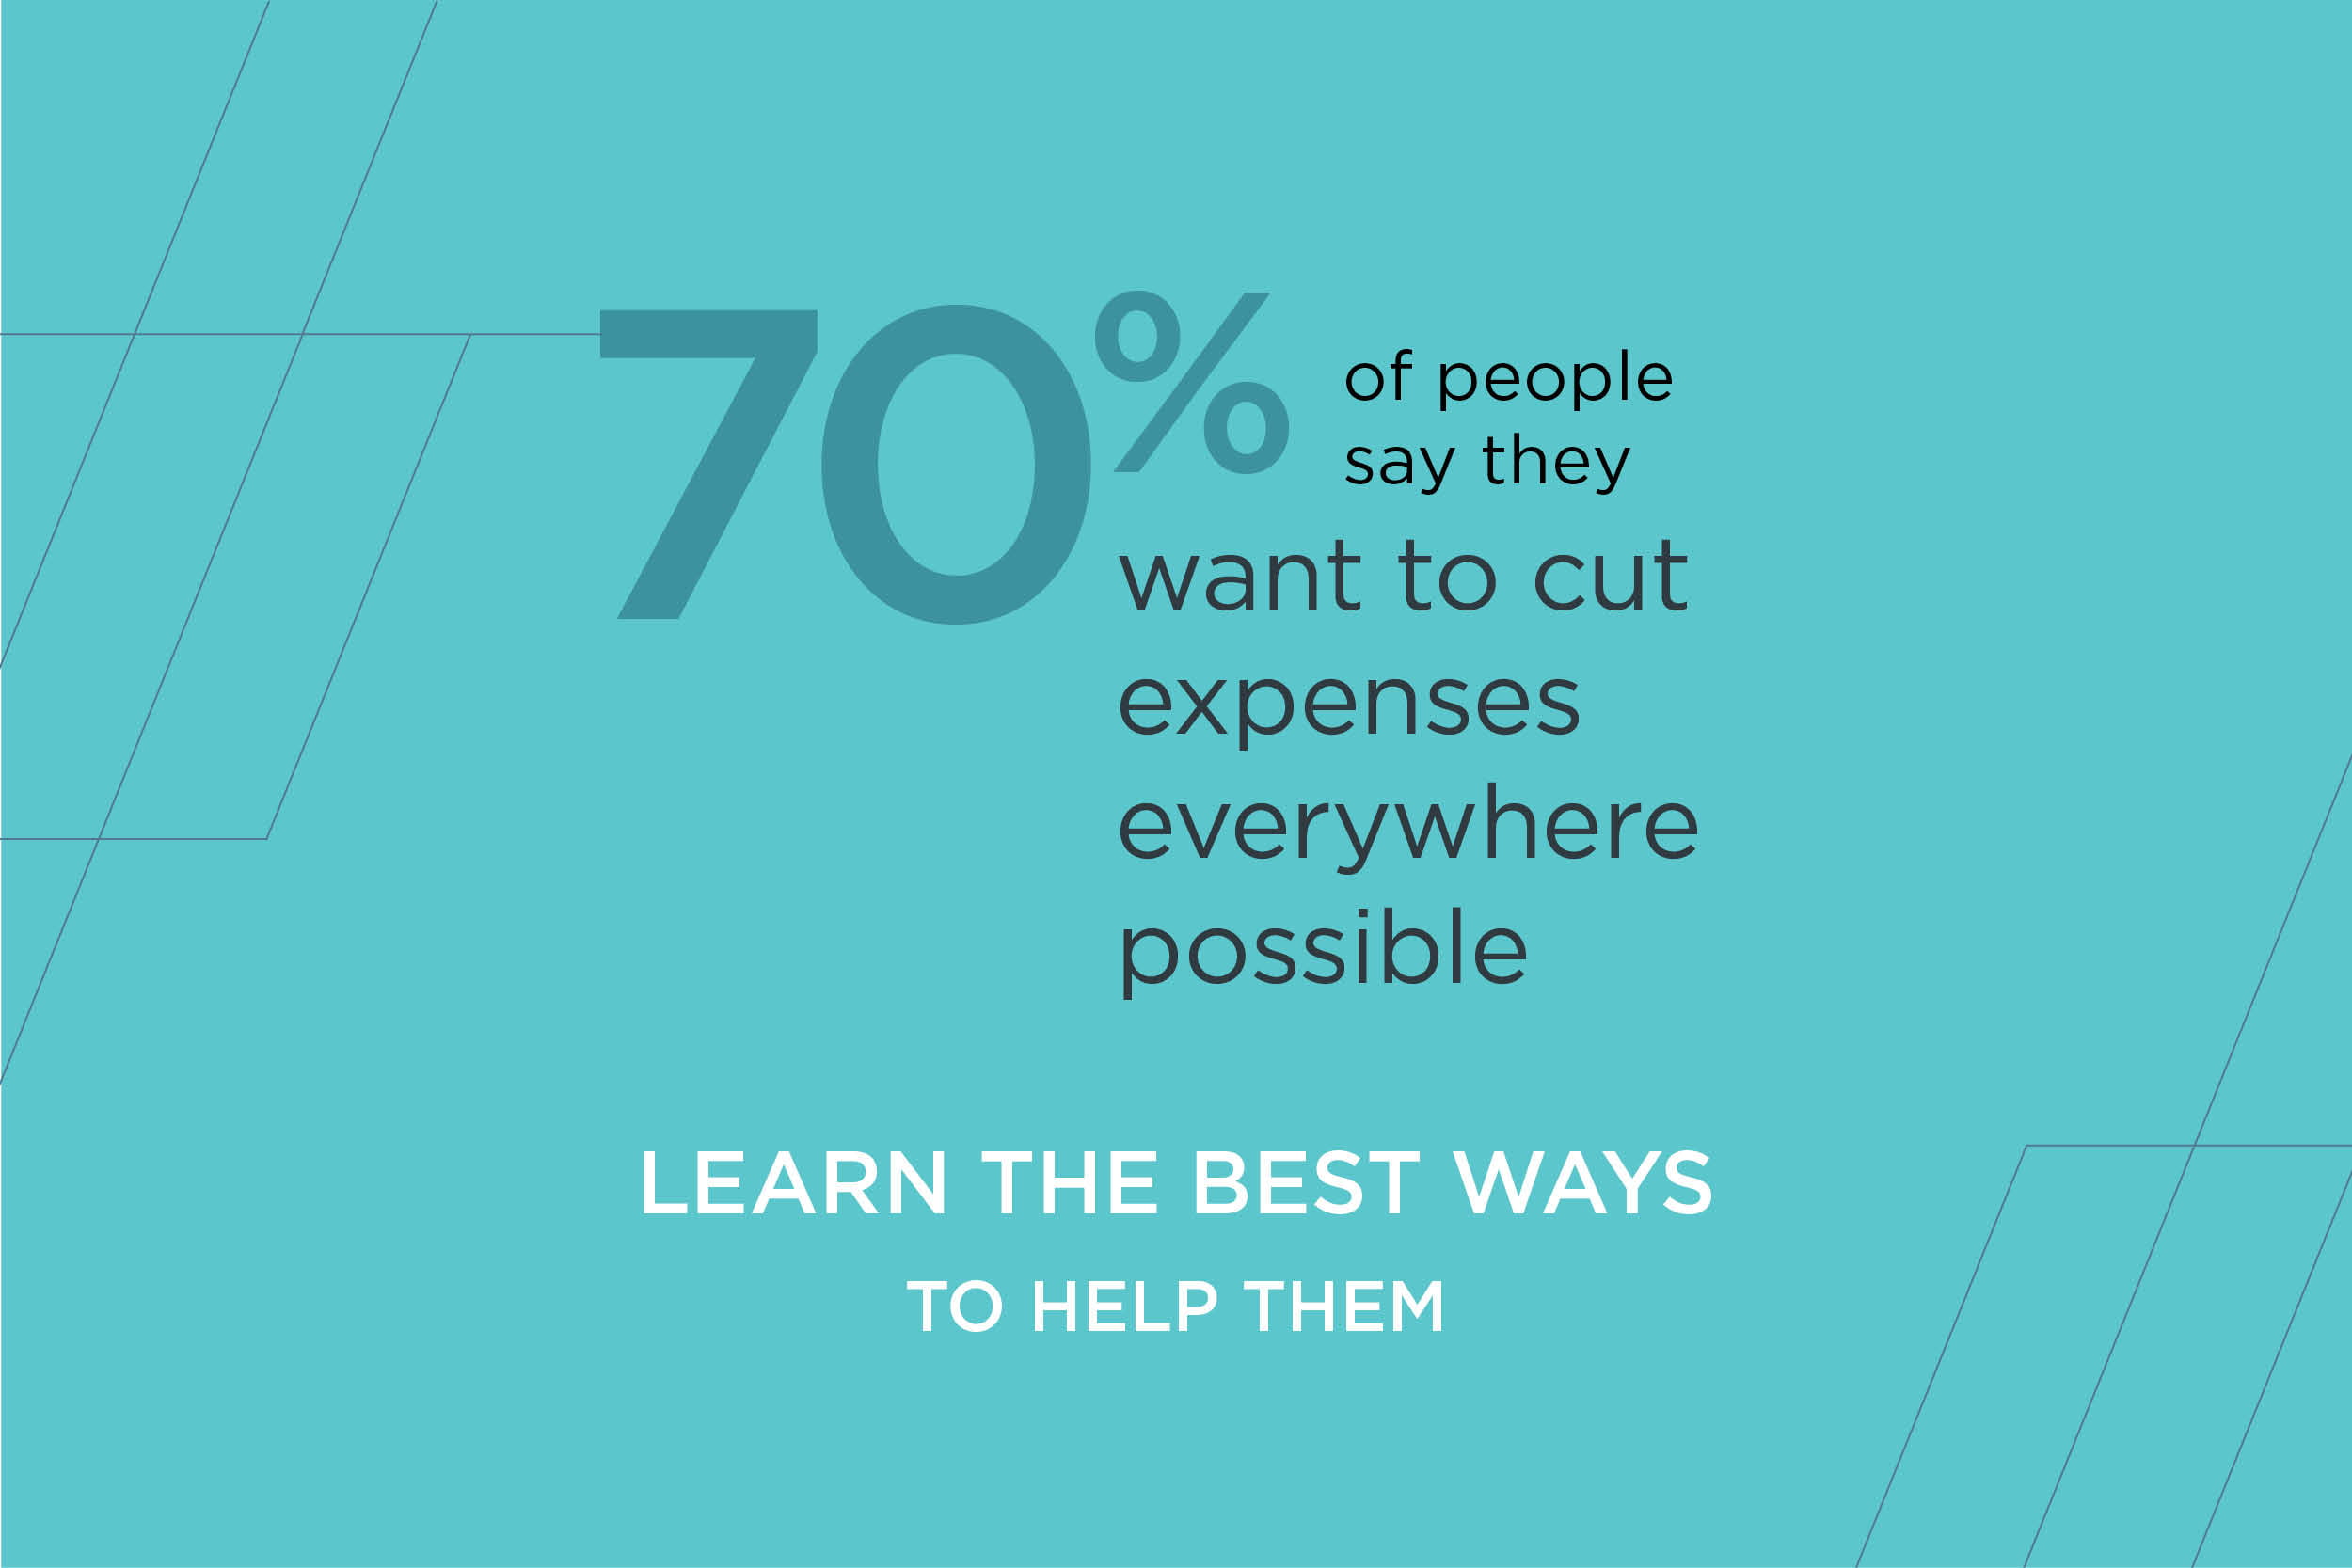 70% od people say they want to cut expenses everywhere possible.